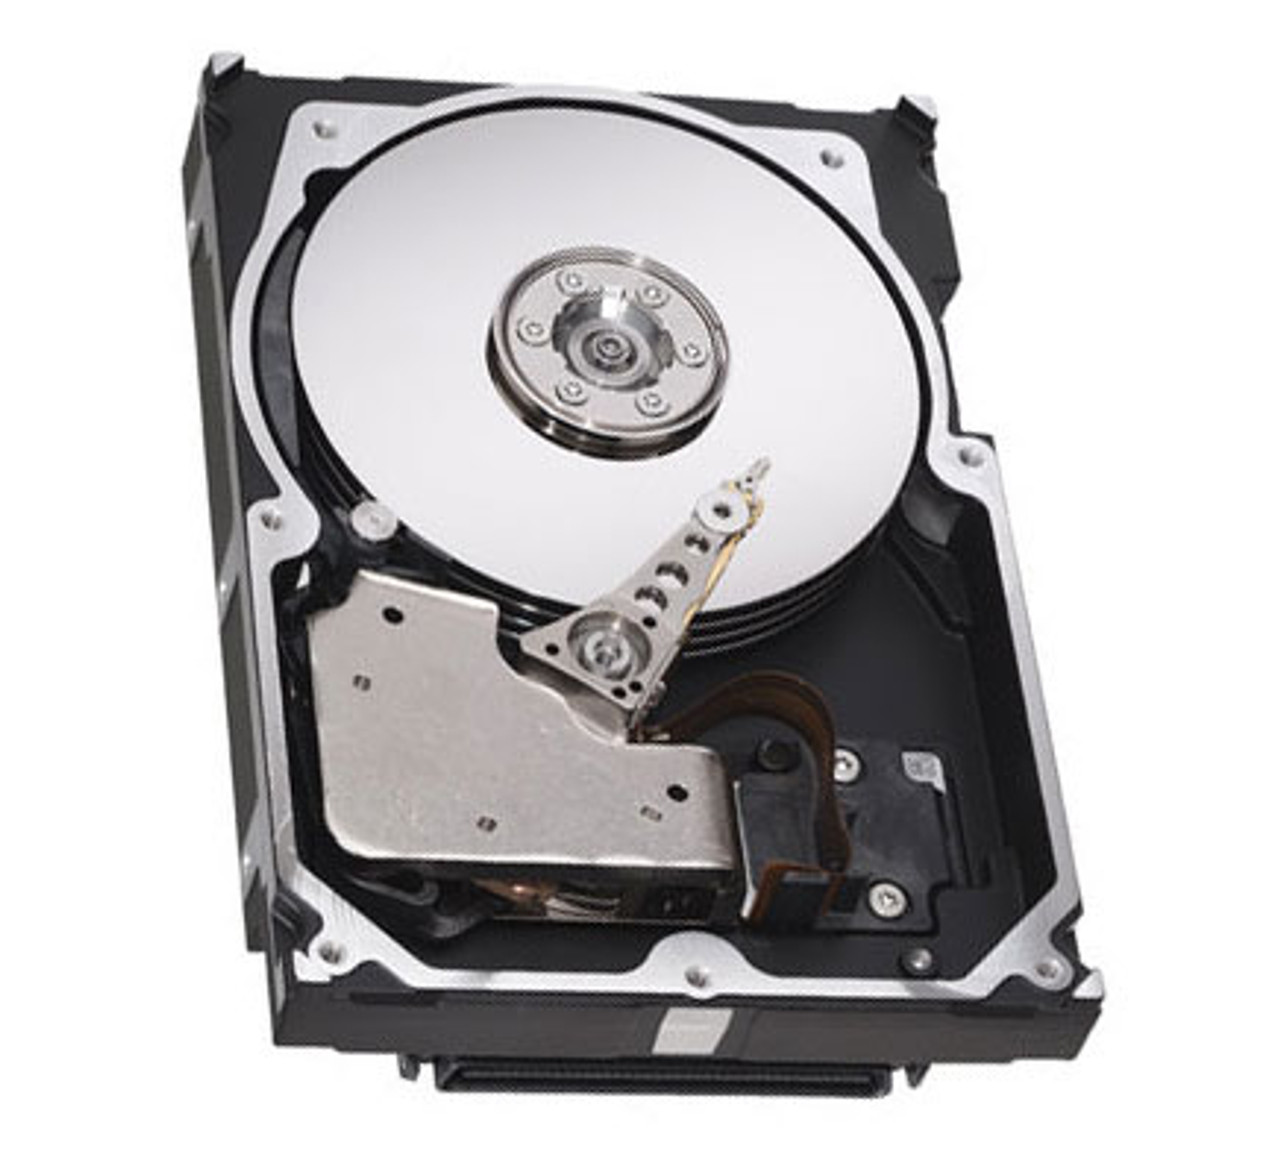 5J3246 Dell 36GB 15000RPM Ultra-160 SCSI 80-Pin Hot Swap 8MB Cache 3.5-inch Internal Hard Drive with Tray